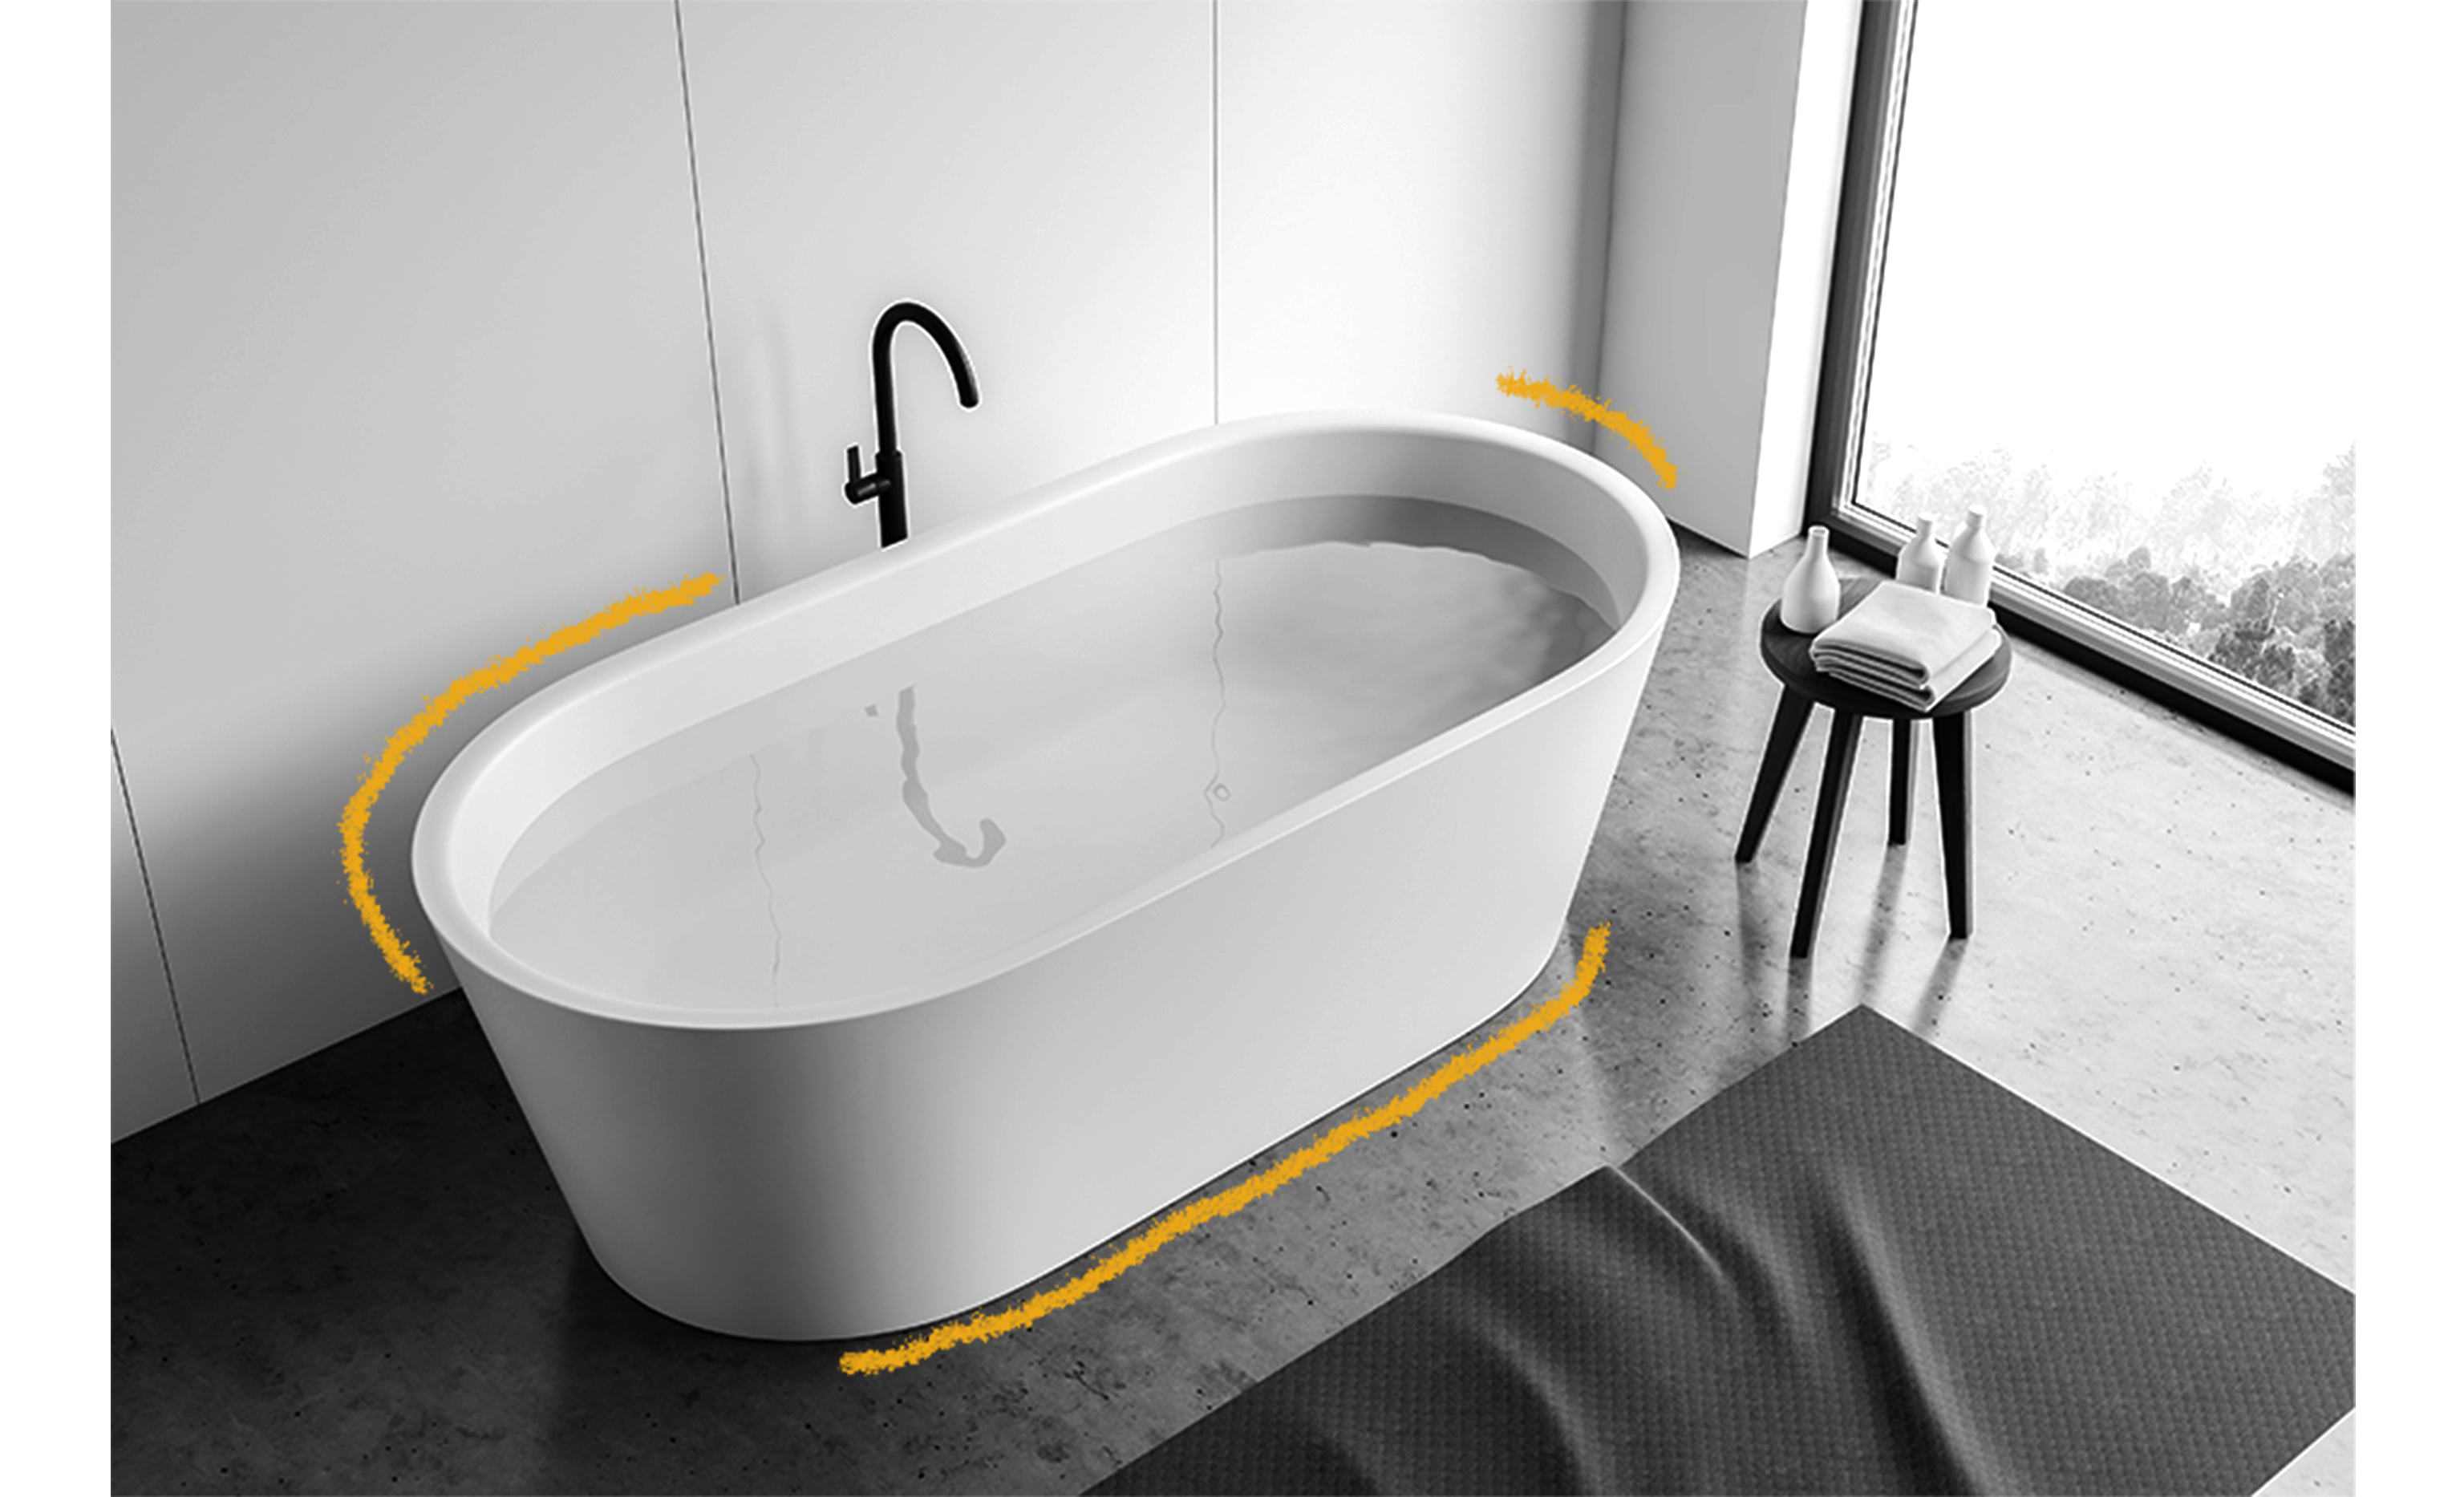 The History of Bathtubs